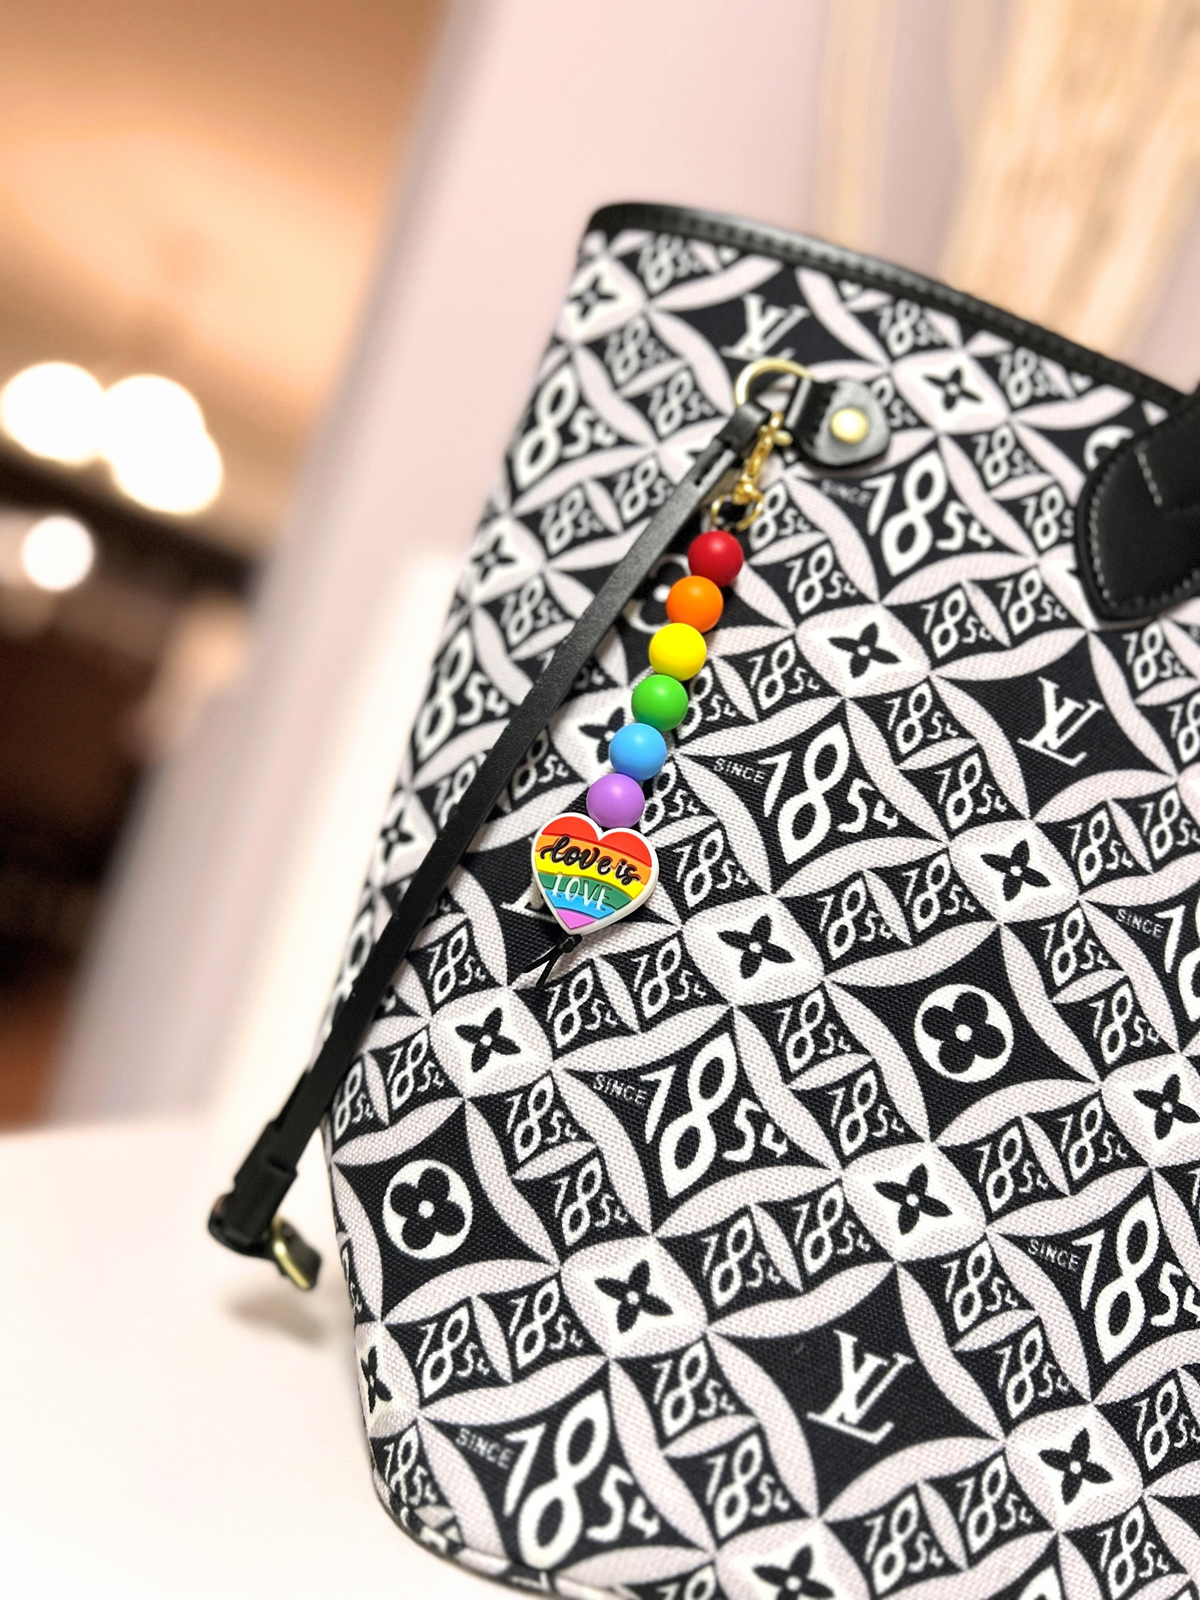 Louis Vuitton Bag with handmade Love is Love Silicone Rainbow Colored Bead Keychain hanging from it